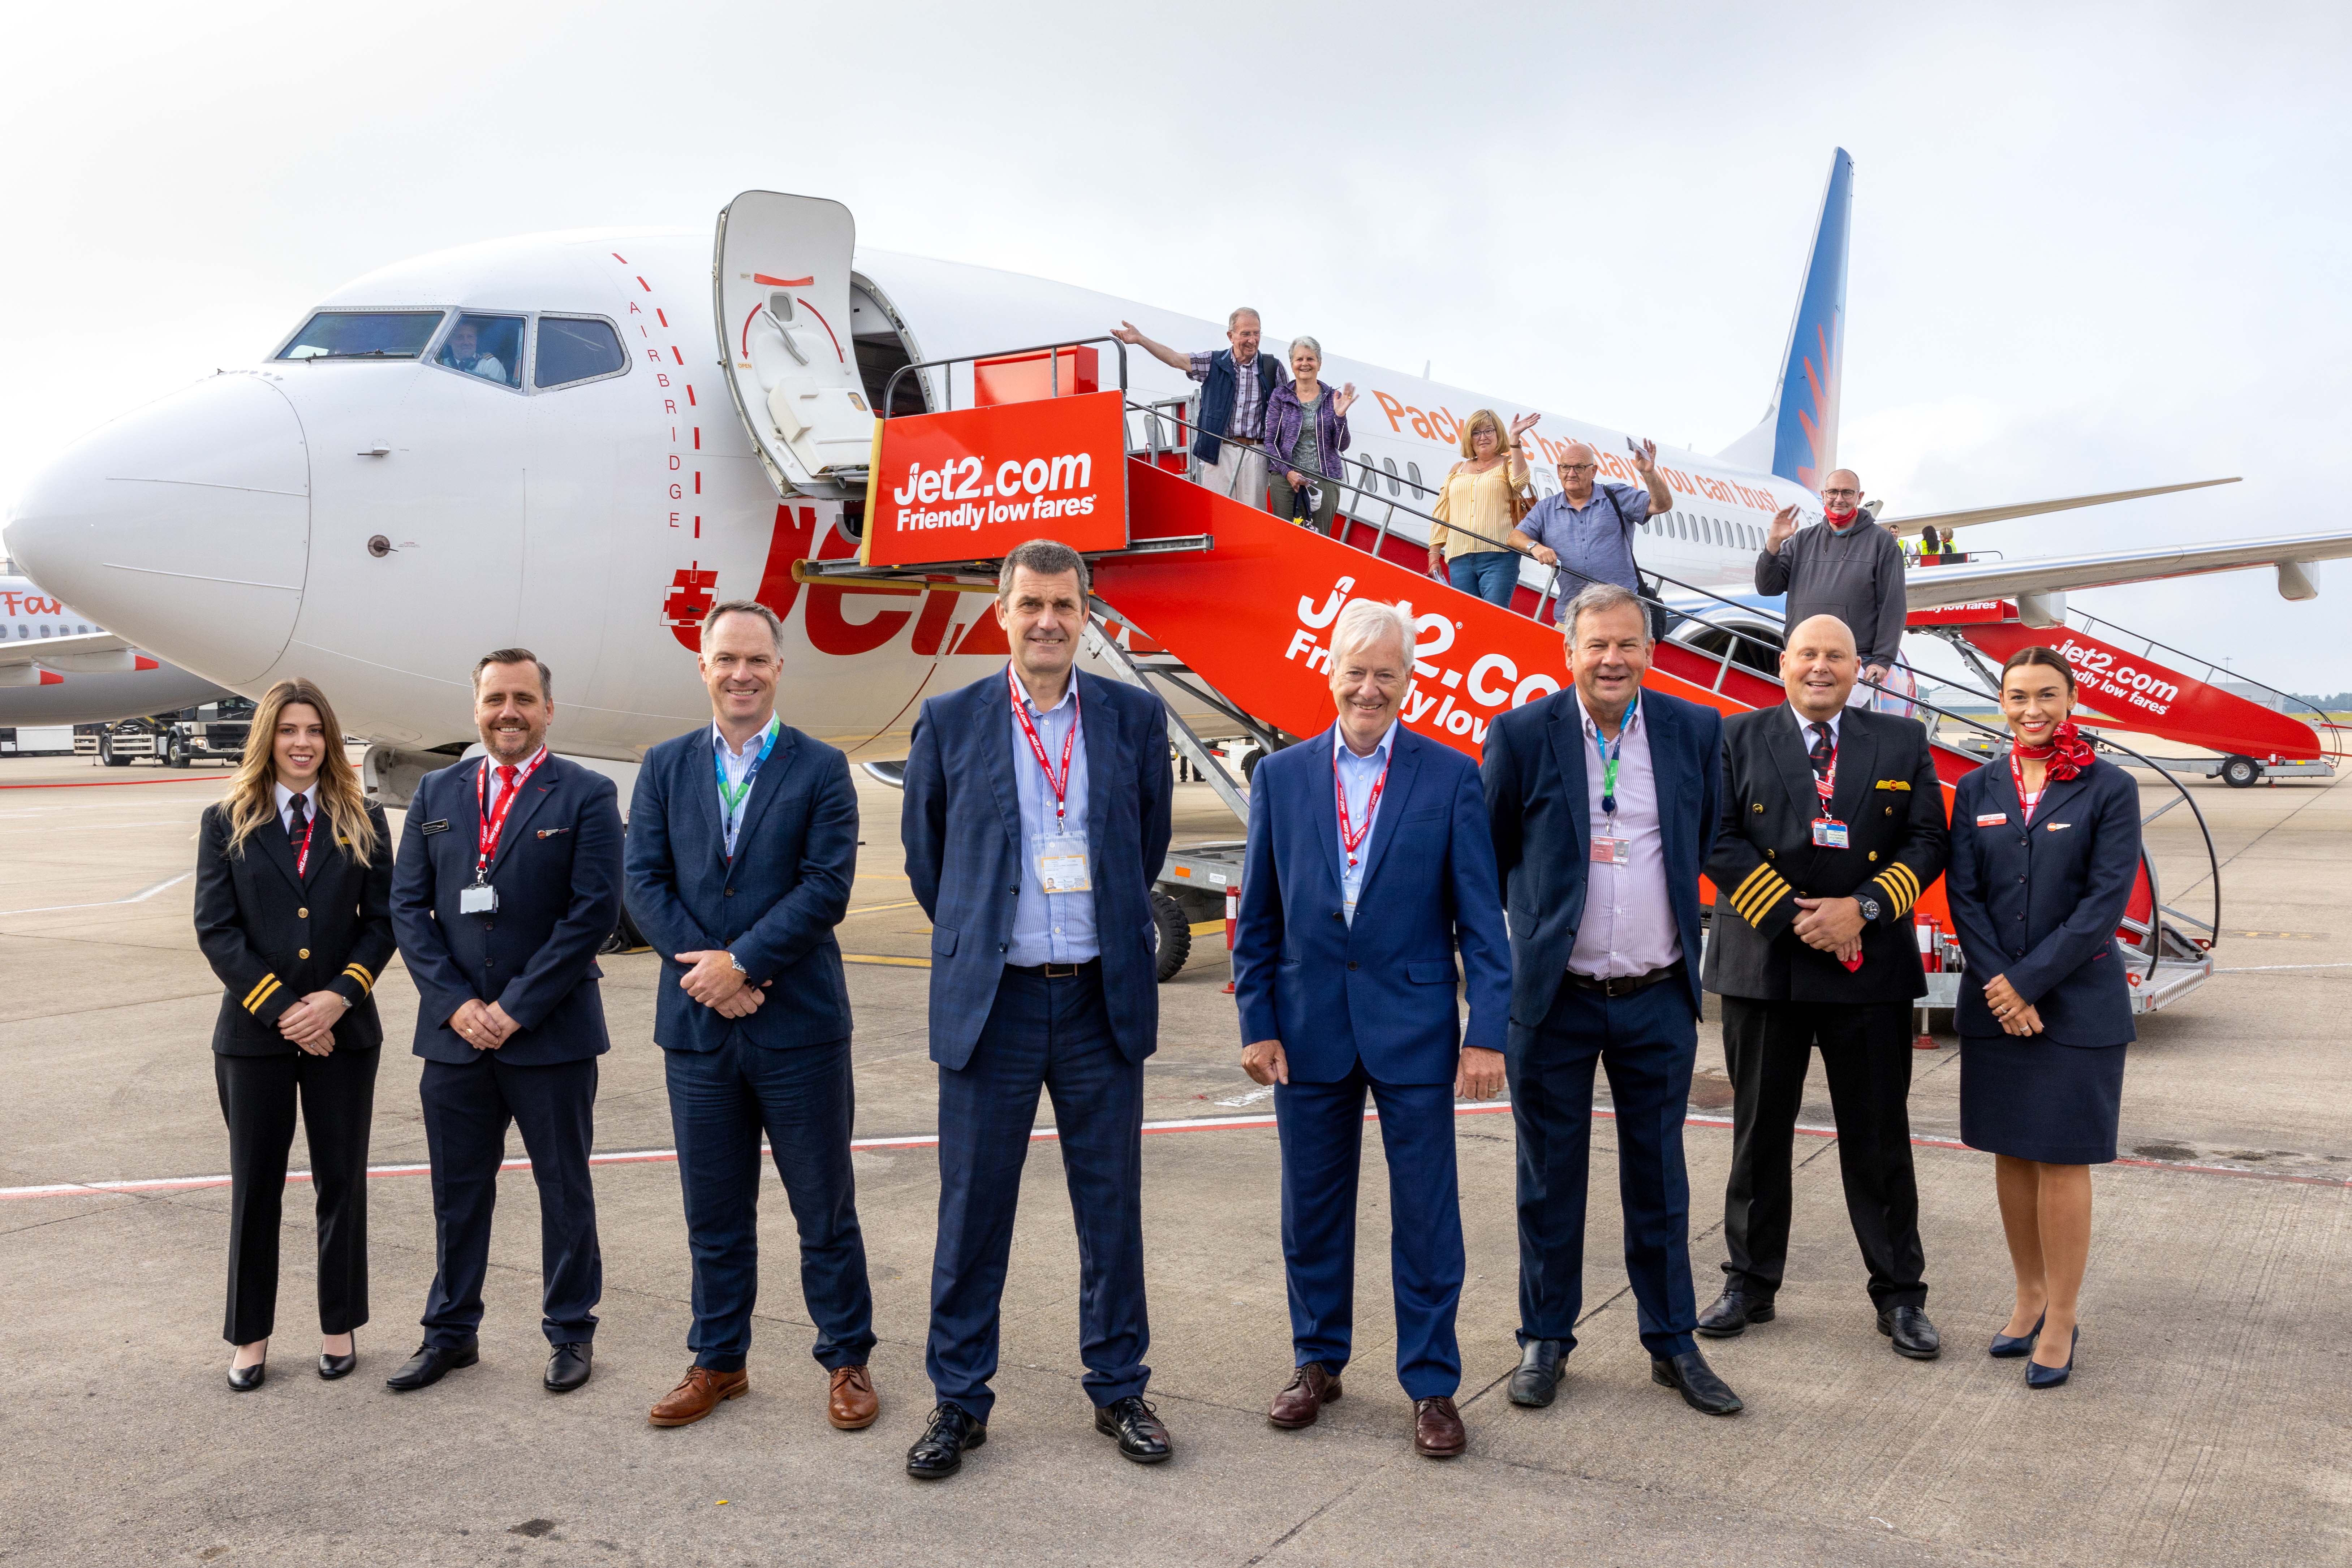 Going places? Jet2’s chief executive, Steve Heapy, and his team at Bristol airport for the launch of the first flight